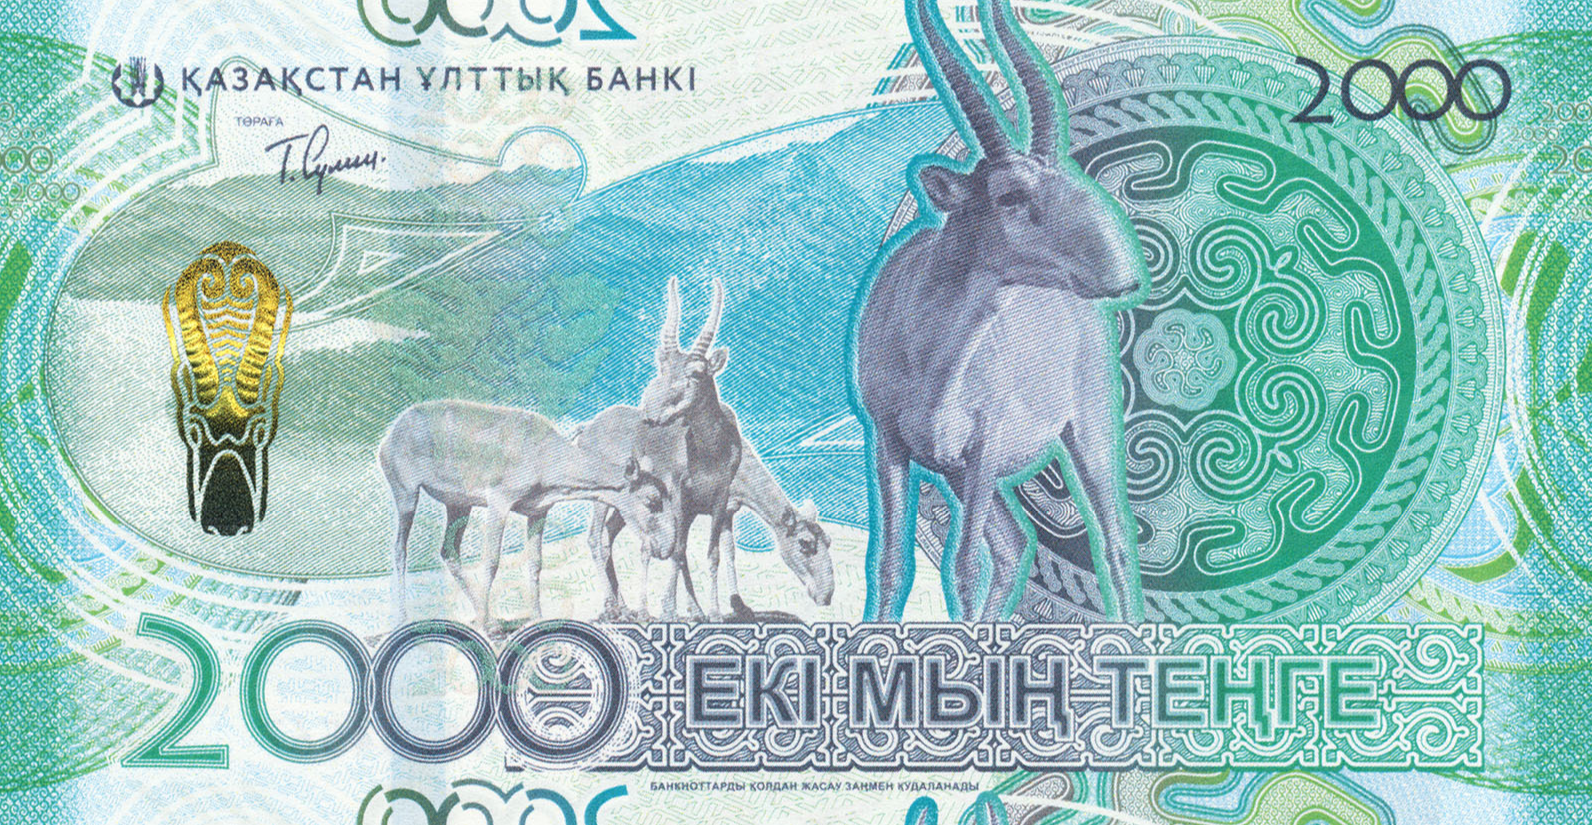 Kazakhstan's National Bank presents new series of national currency banknotes (PHOTO)